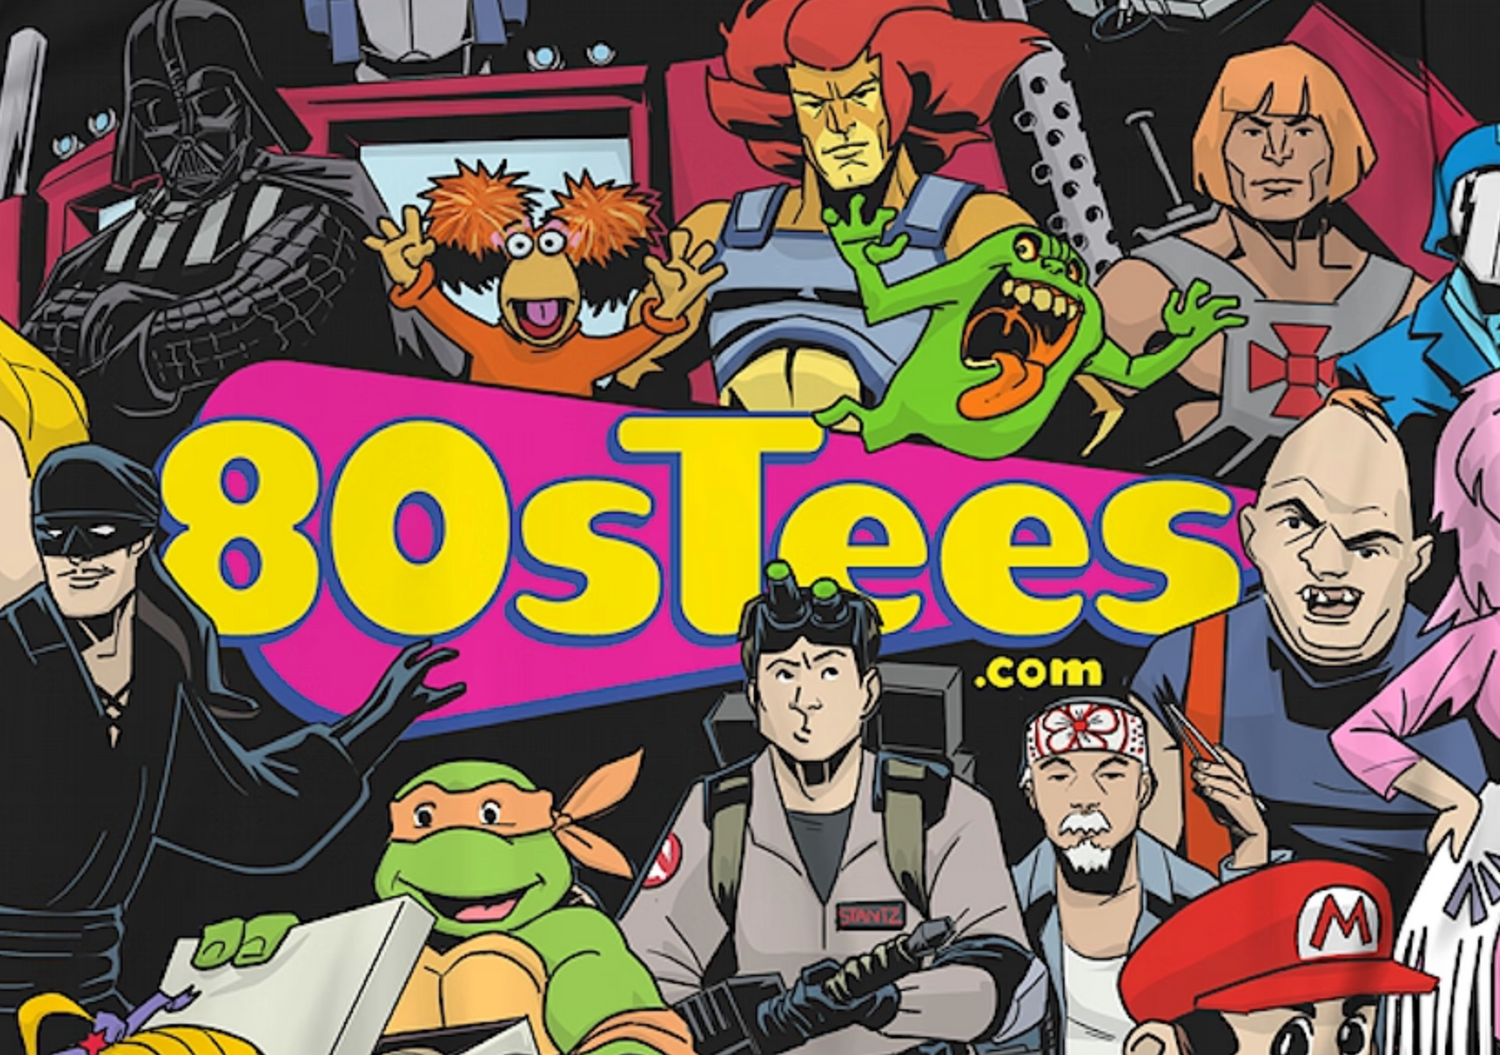 80sTees logo with classic 80s movie and TV characters around it.